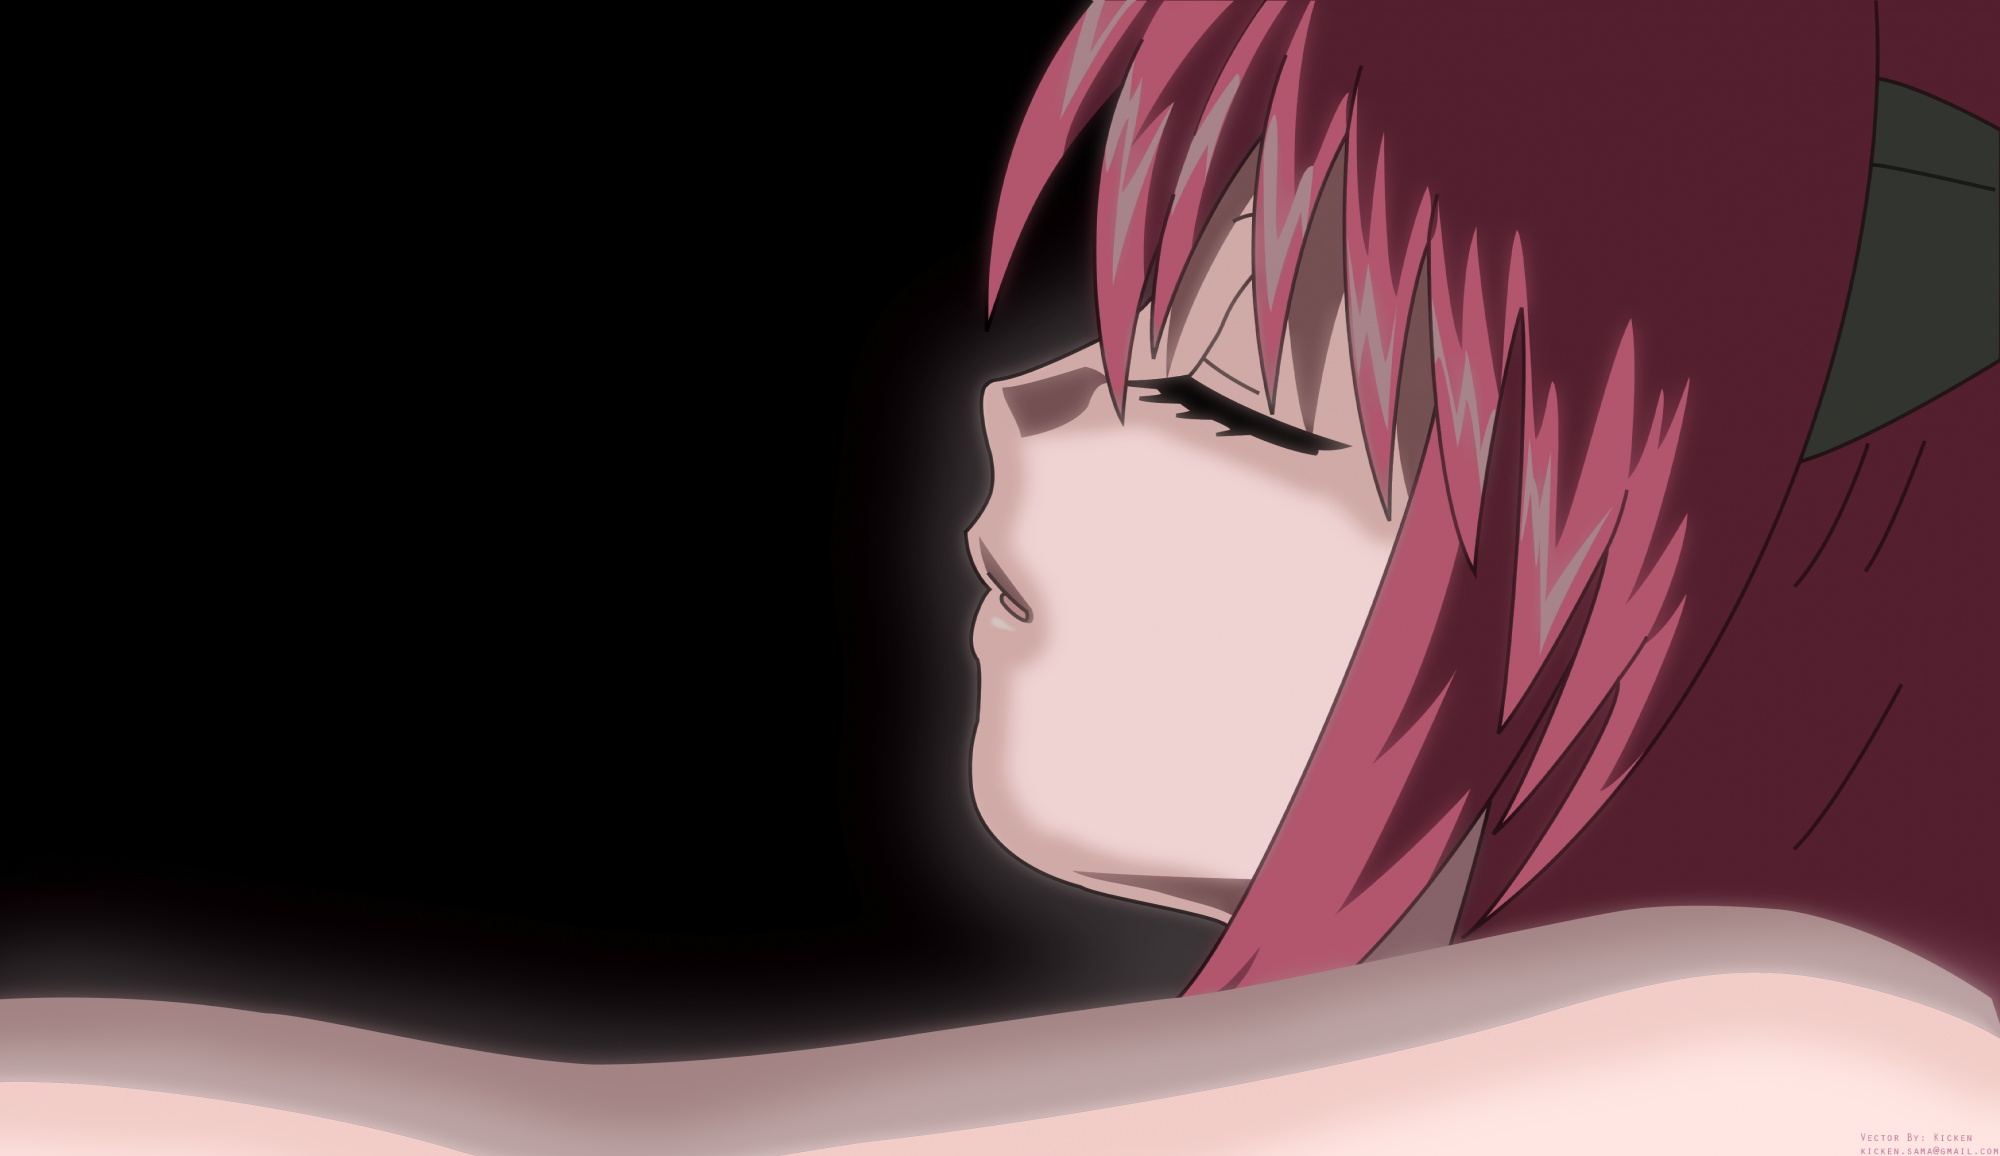 99 Elfen Lied HD Wallpapers | Backgrounds - Wallpaper Abyss - Page 3